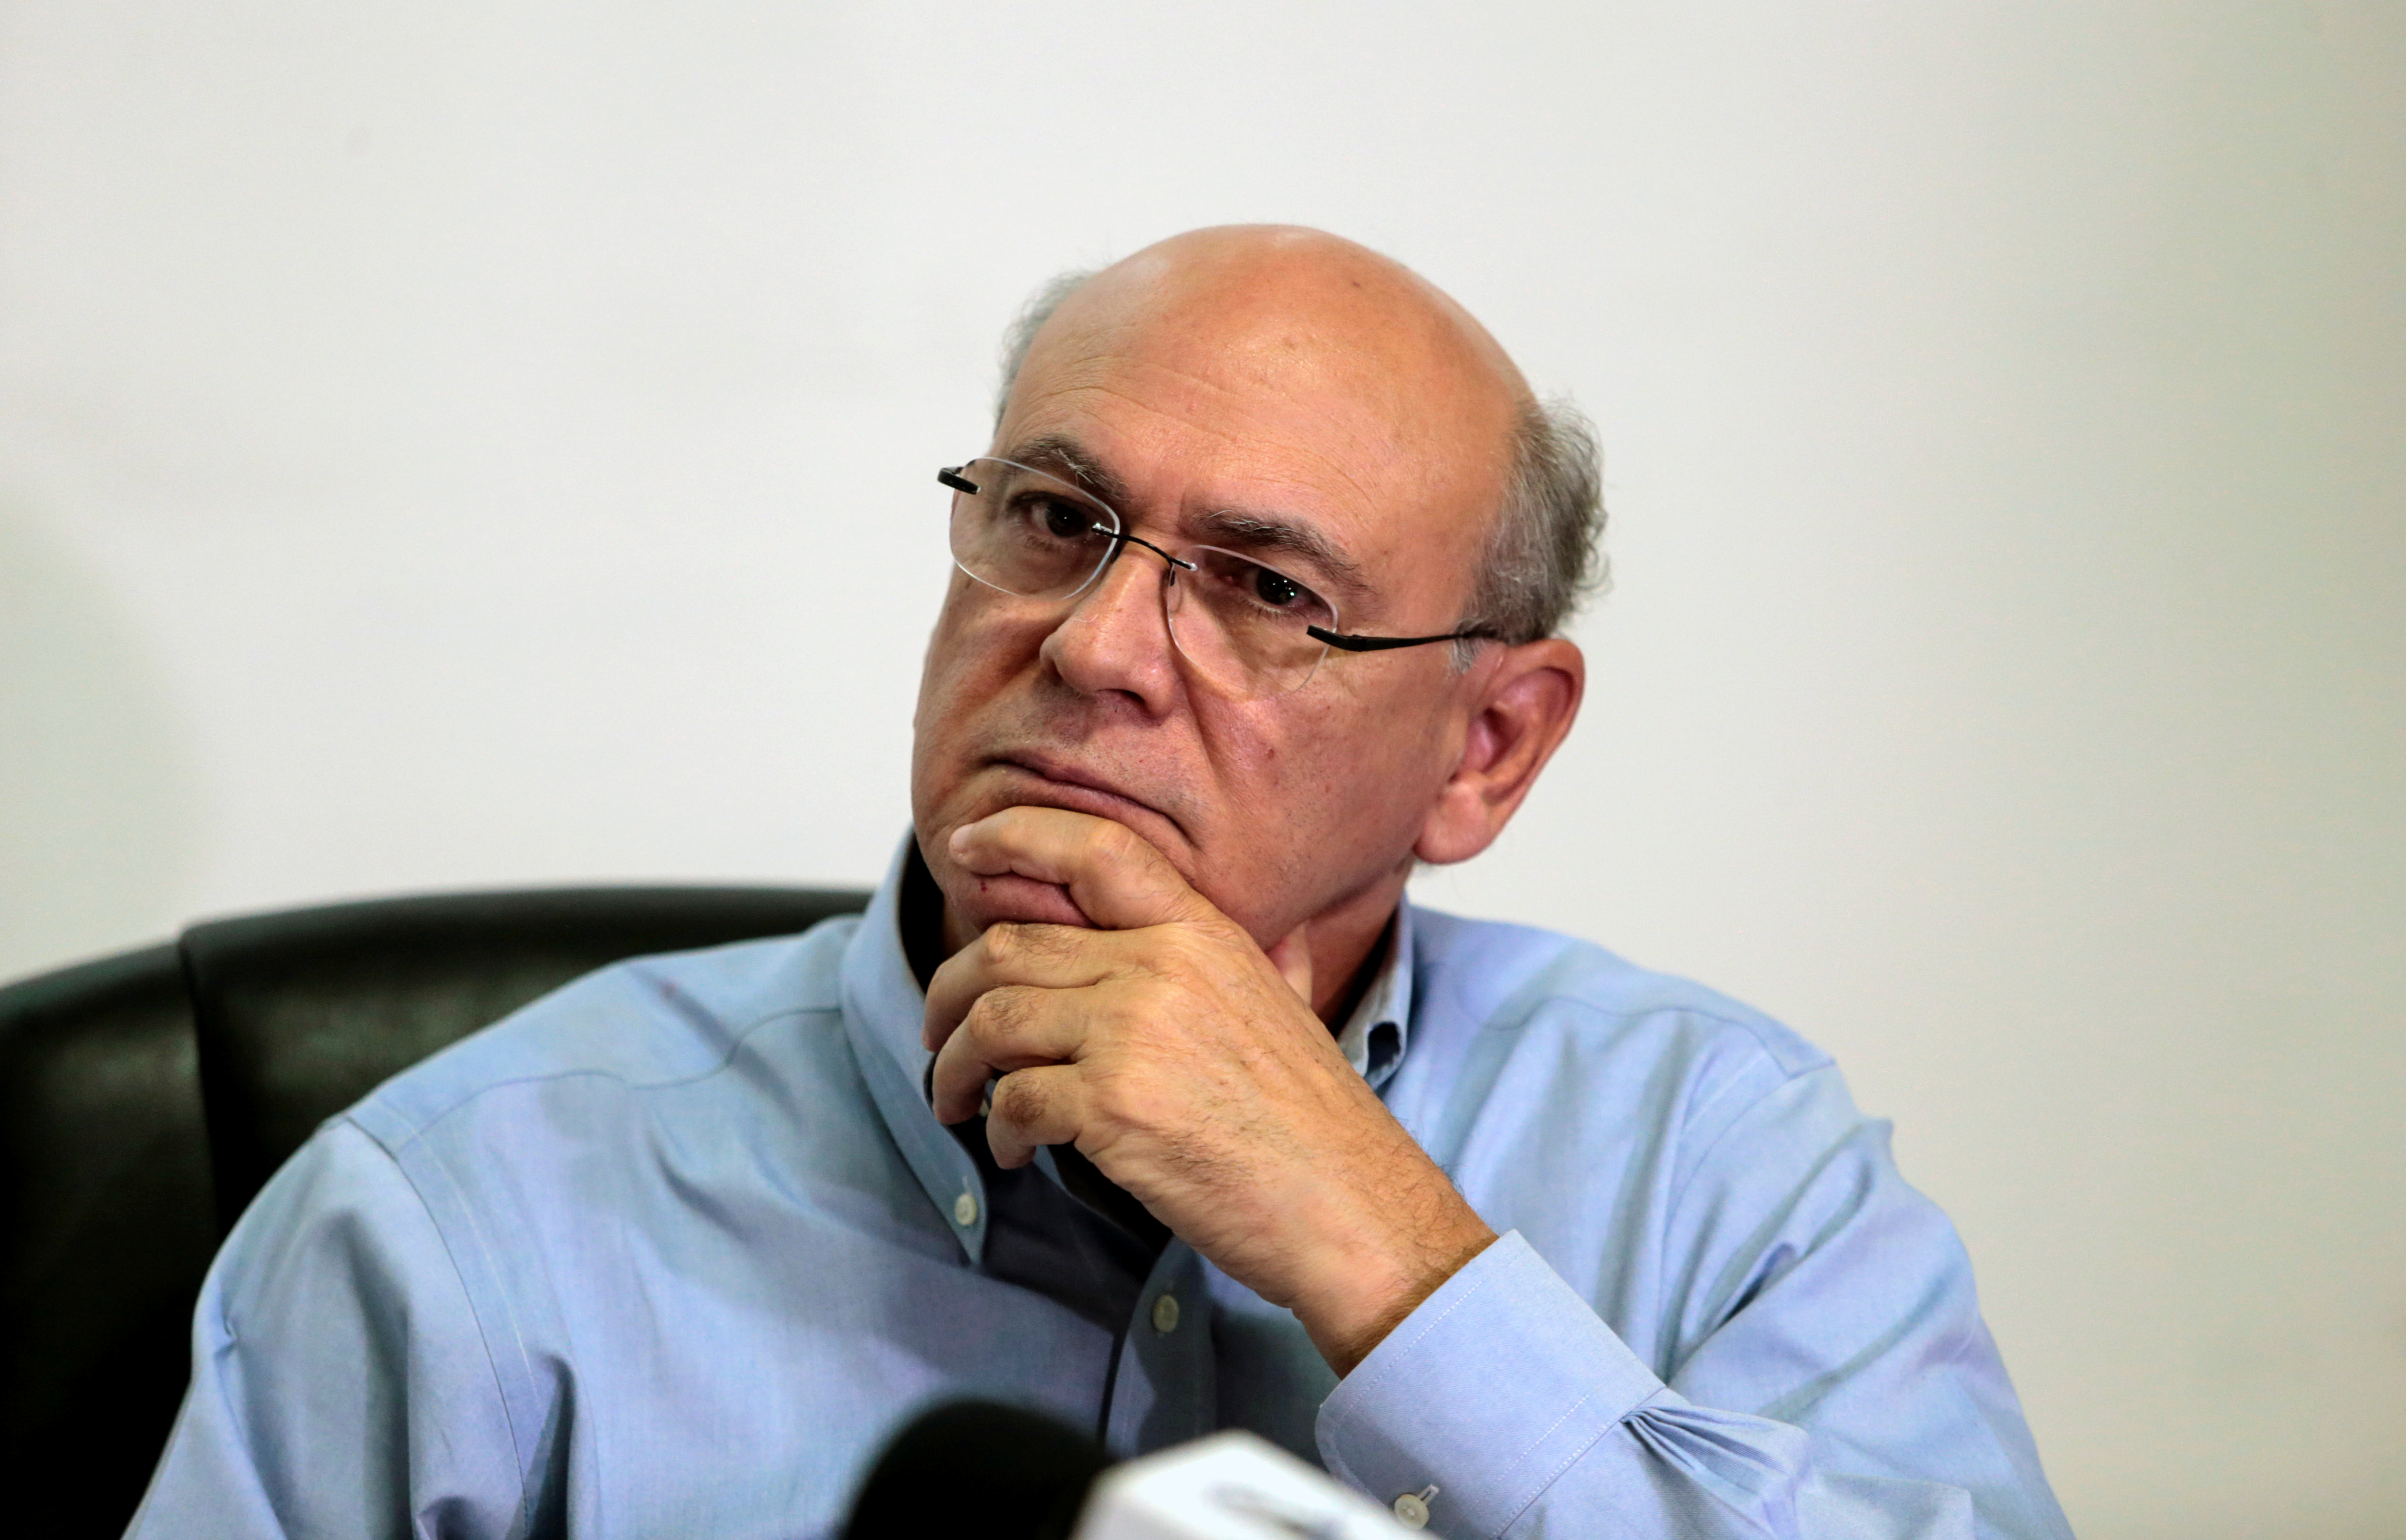 Journalist Carlos Fernando Chamorro, critic of the government of President Daniel Ortega, listens to question of a journalist during a news conference in Managua